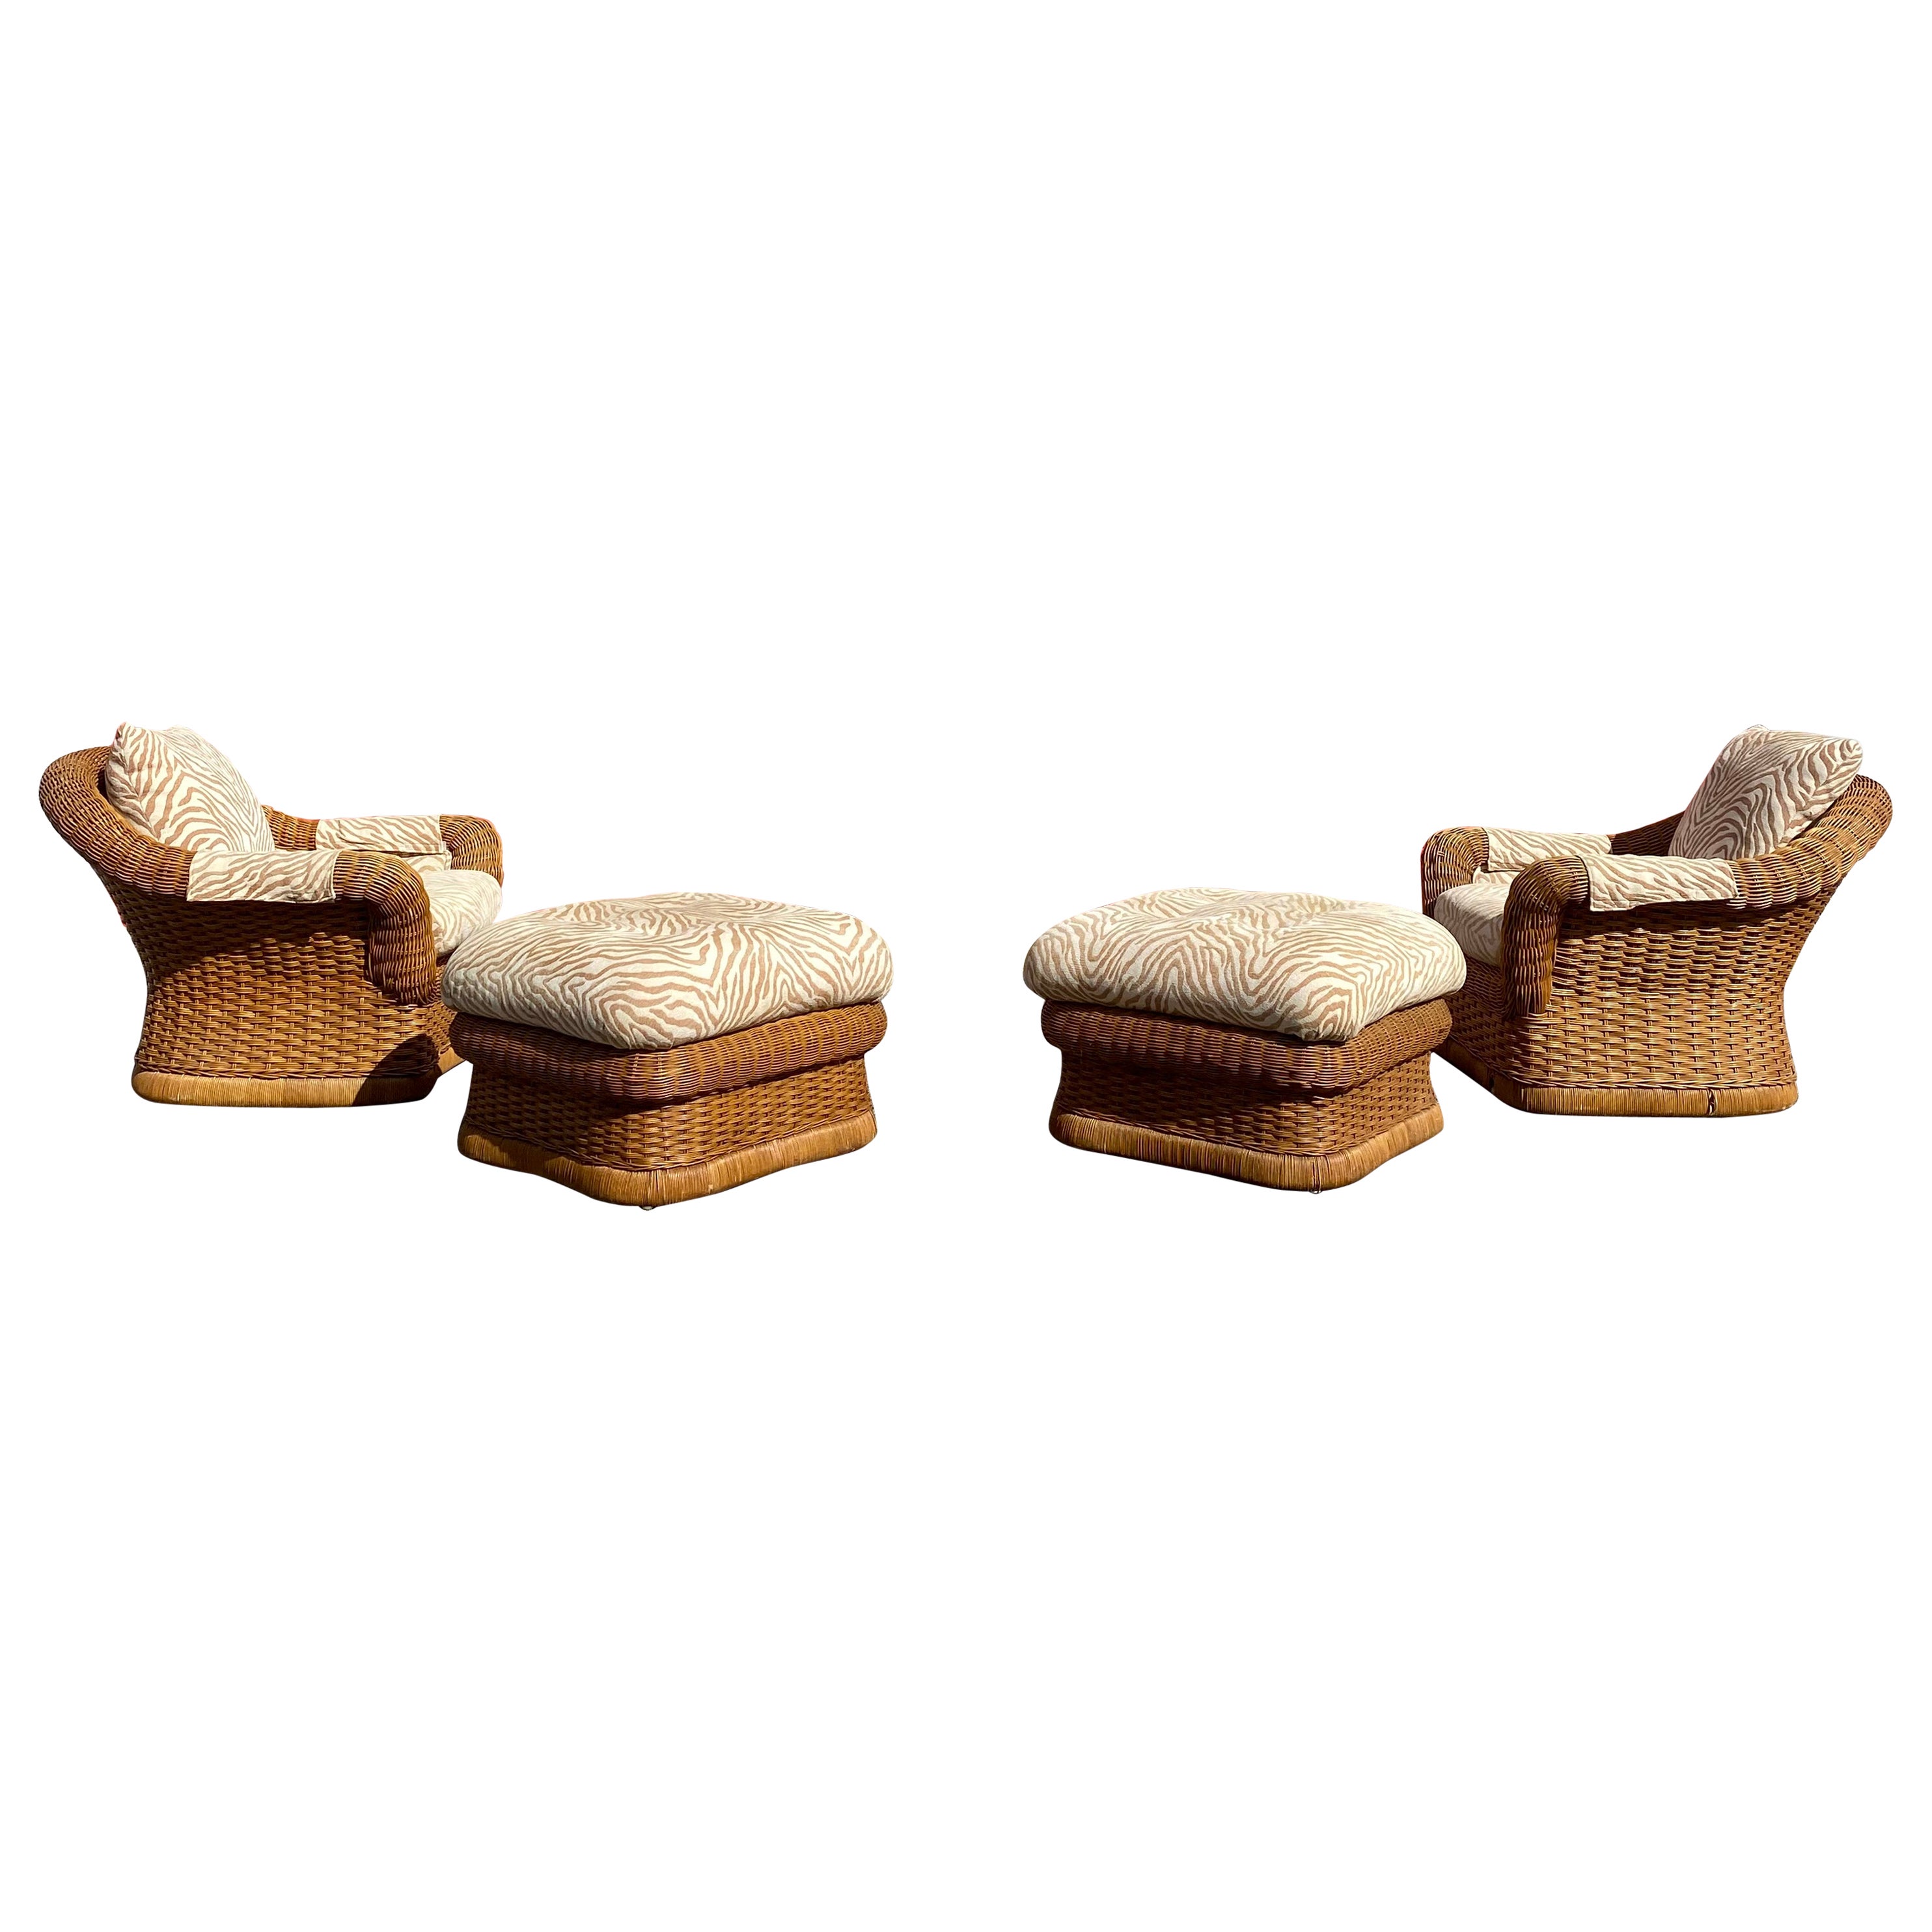 1970s Ficks Reed Woven Rattan Zebra Chairs and Ottomans, Set of 4